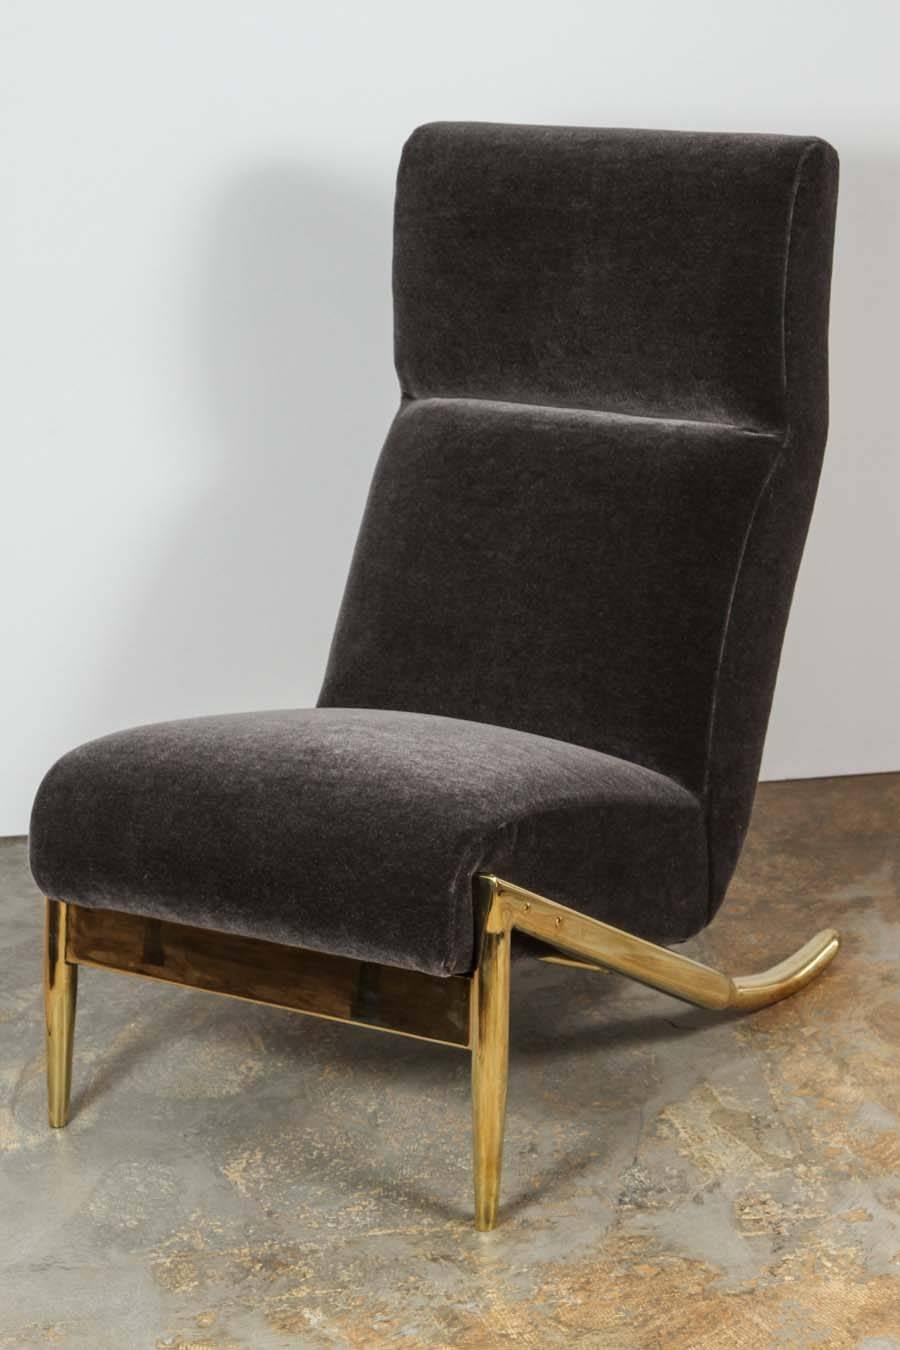 Paul Marra slipper chair in unlacquered polished brass and upholstered in mohair (as example). Brass is unlacquered therefore will patina naturally. COM only 5yds. 

As shown is sold and we are not able to obtain this additional mohair. For ordering